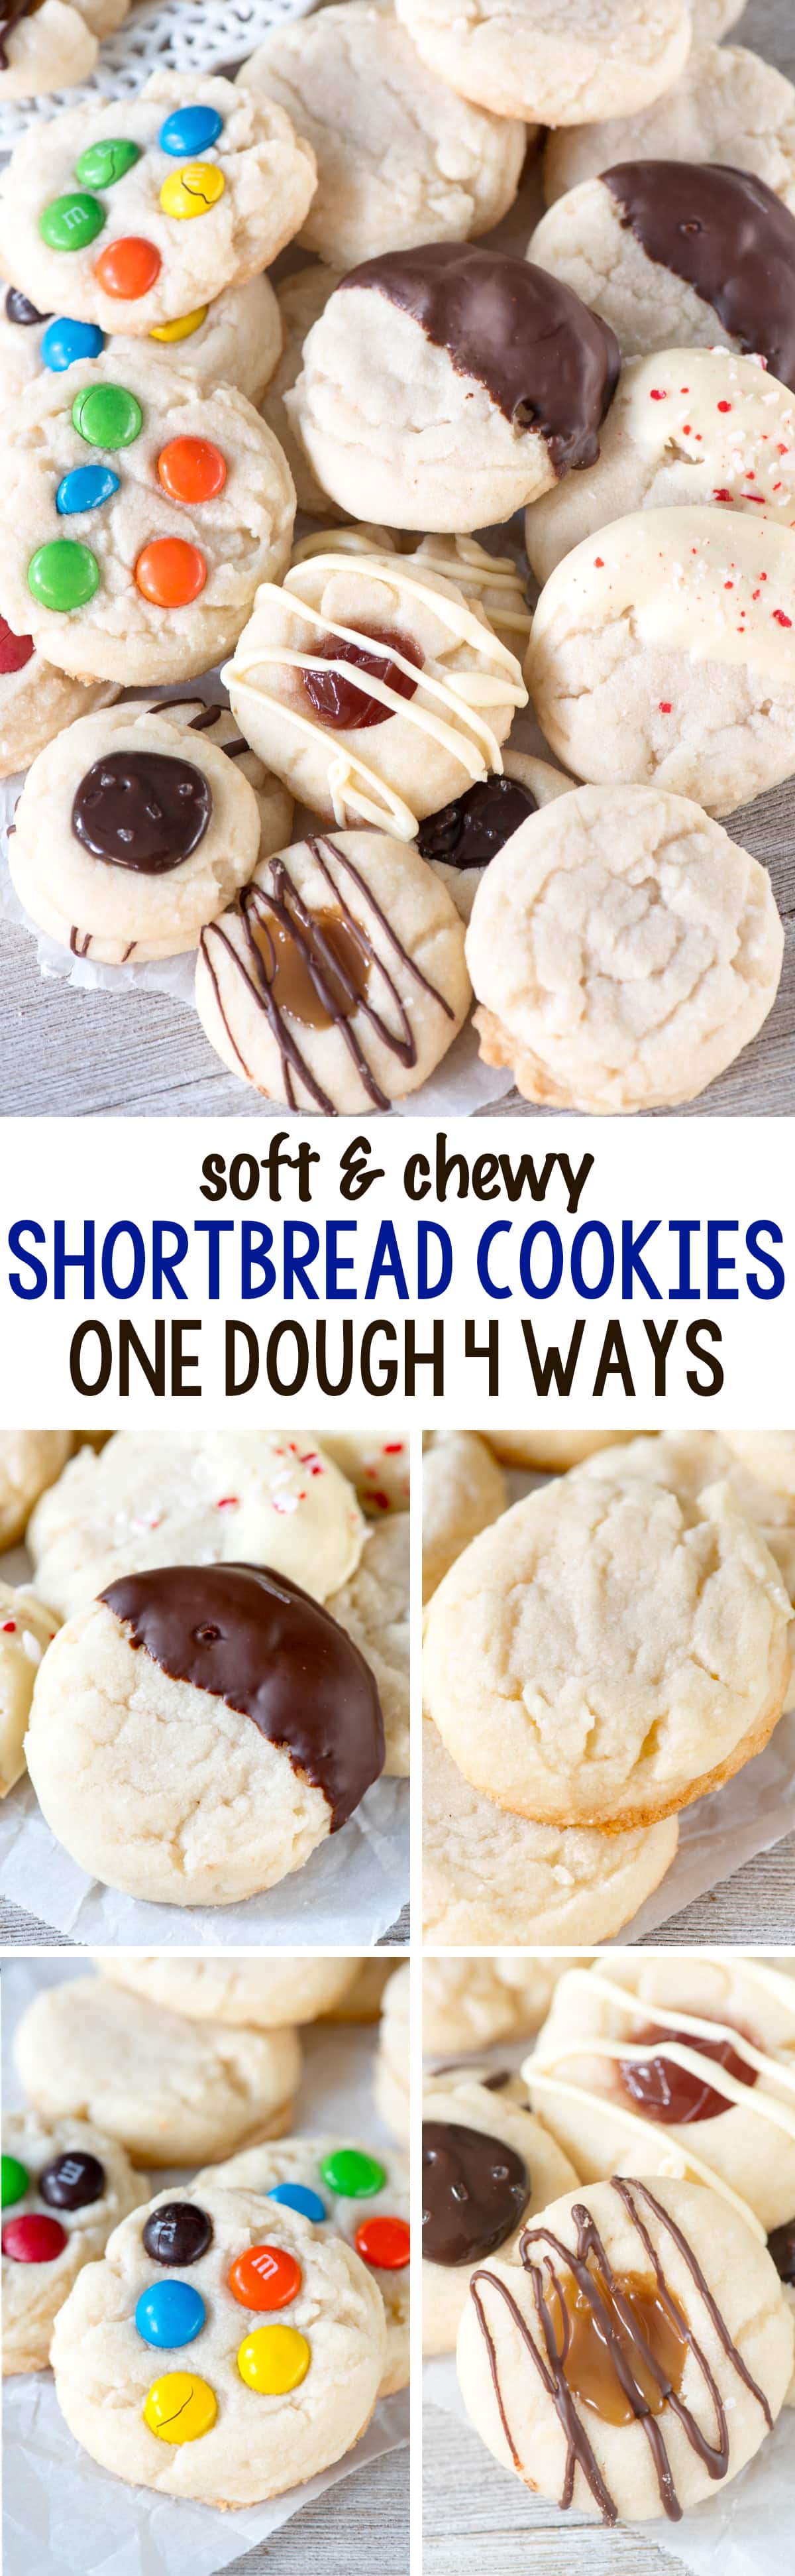 Soft Chewy Shortbread Cookies - this easy cookie recipe has one dough and can be made 4 ways! There are only 4 ingredients in the basic shortbread dough, dip them in chocolate, add M&Ms or make them into thumbprint cookies!